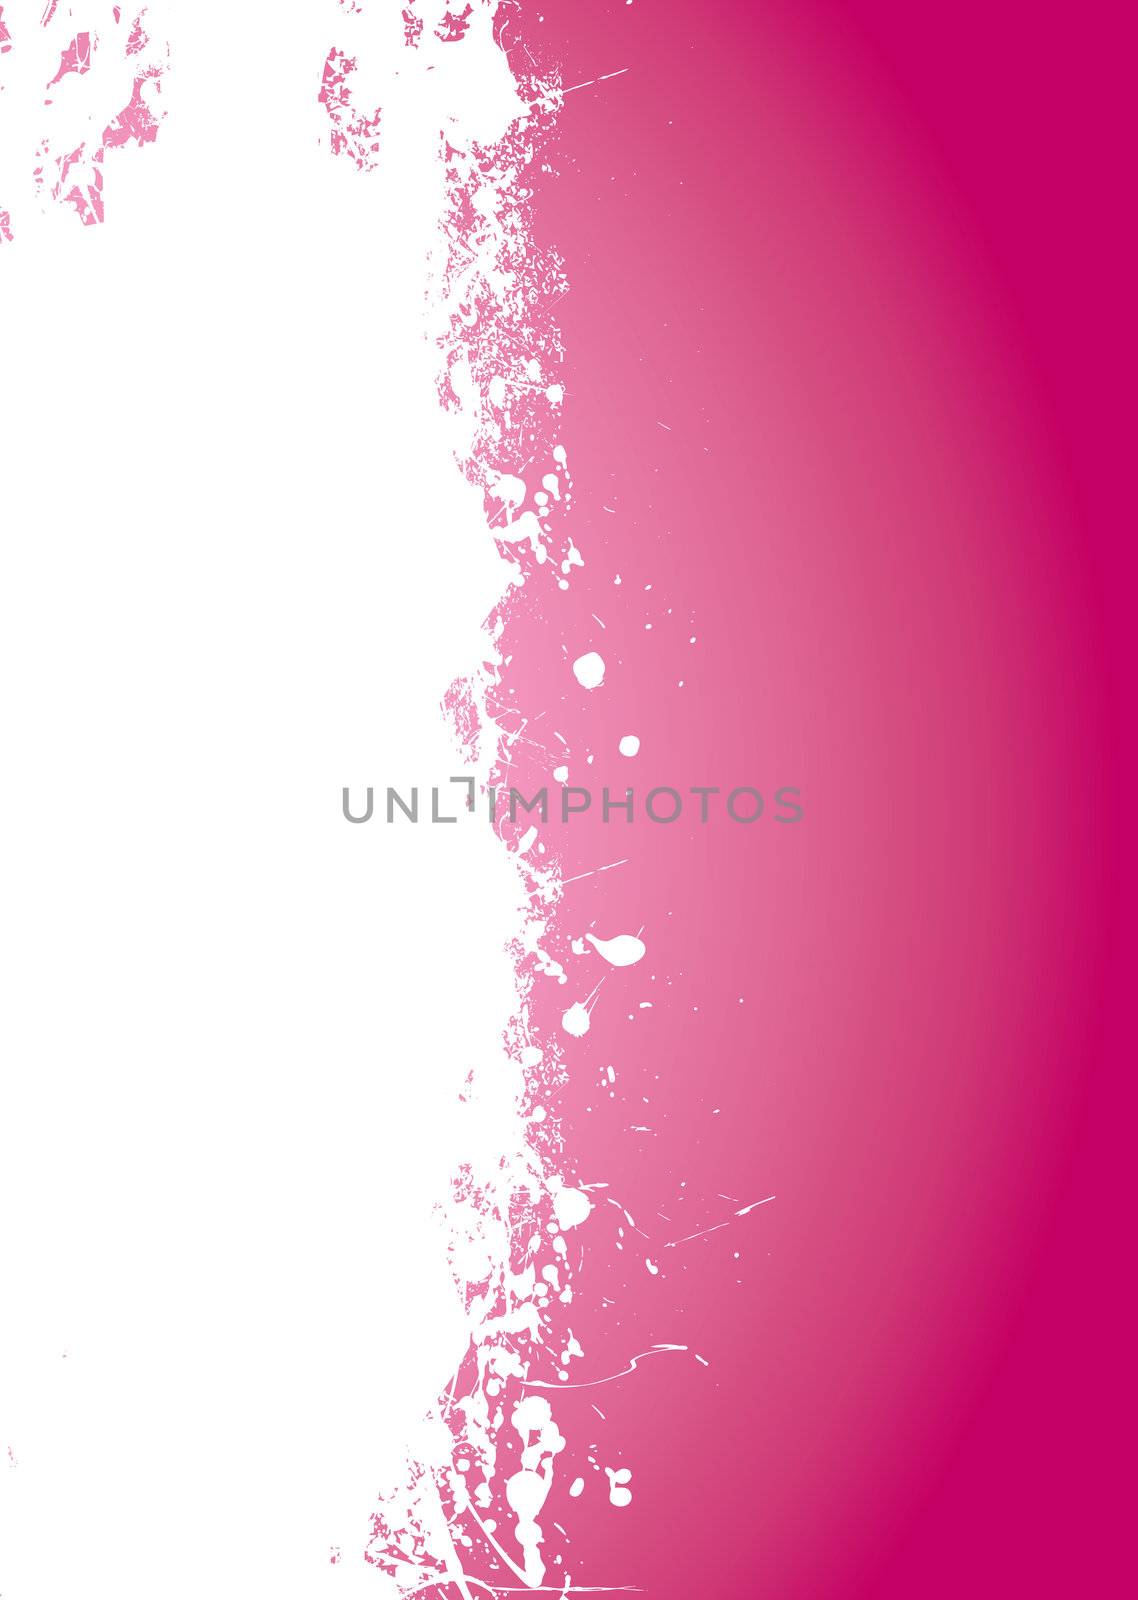 Pink splate background with white element and copy space